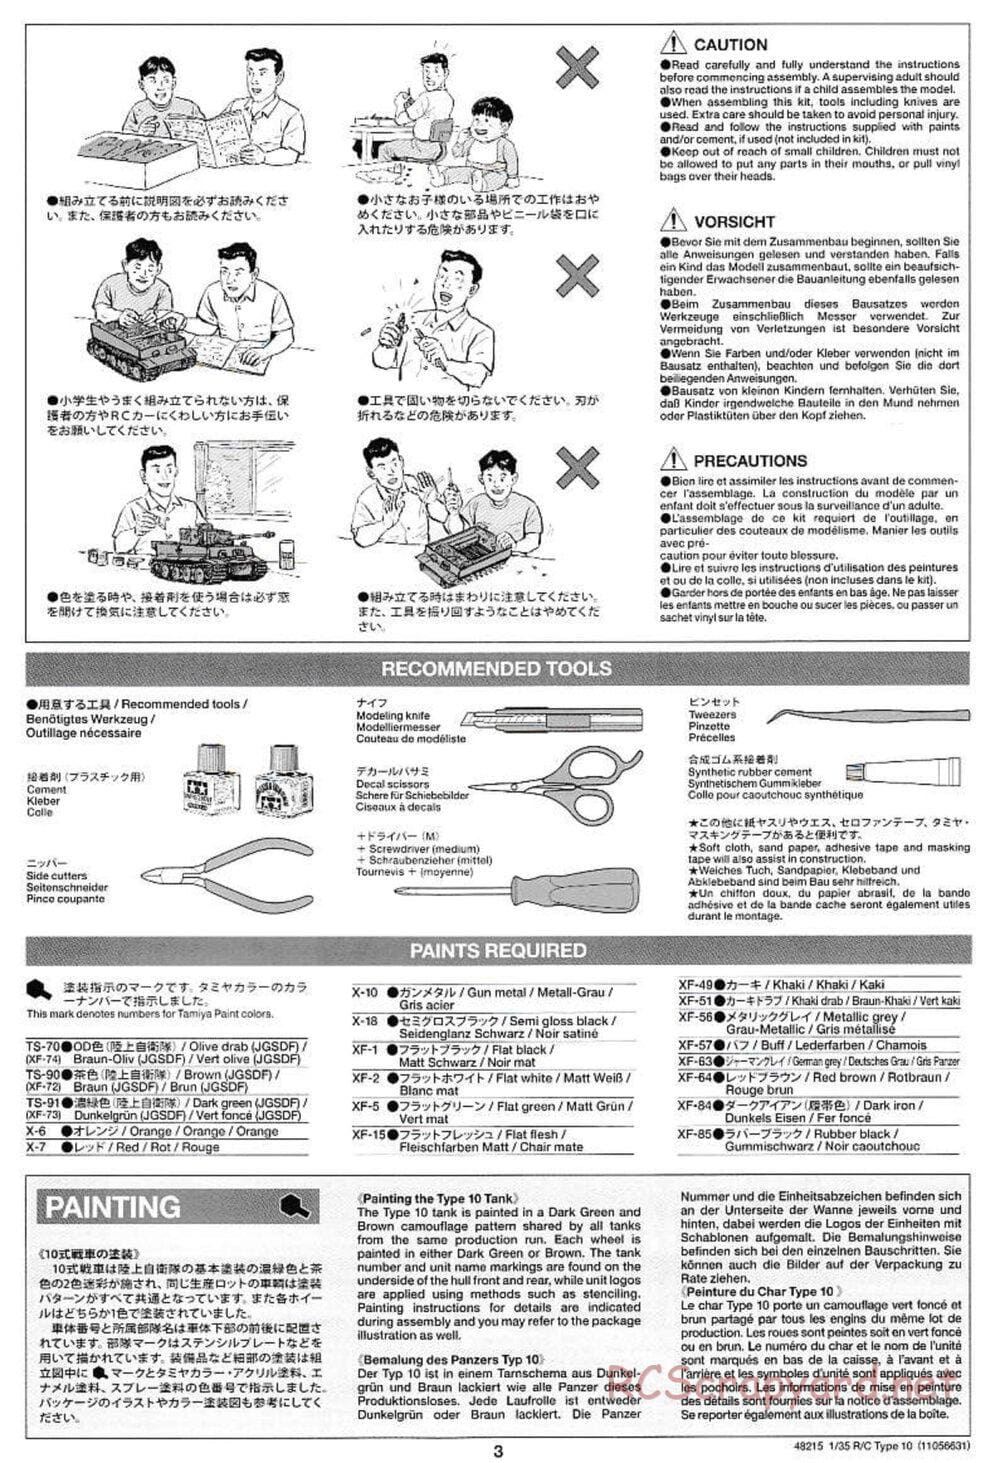 Tamiya - JGSDF Type 10 Tank - 1/35 Scale Chassis - Manual - Page 3